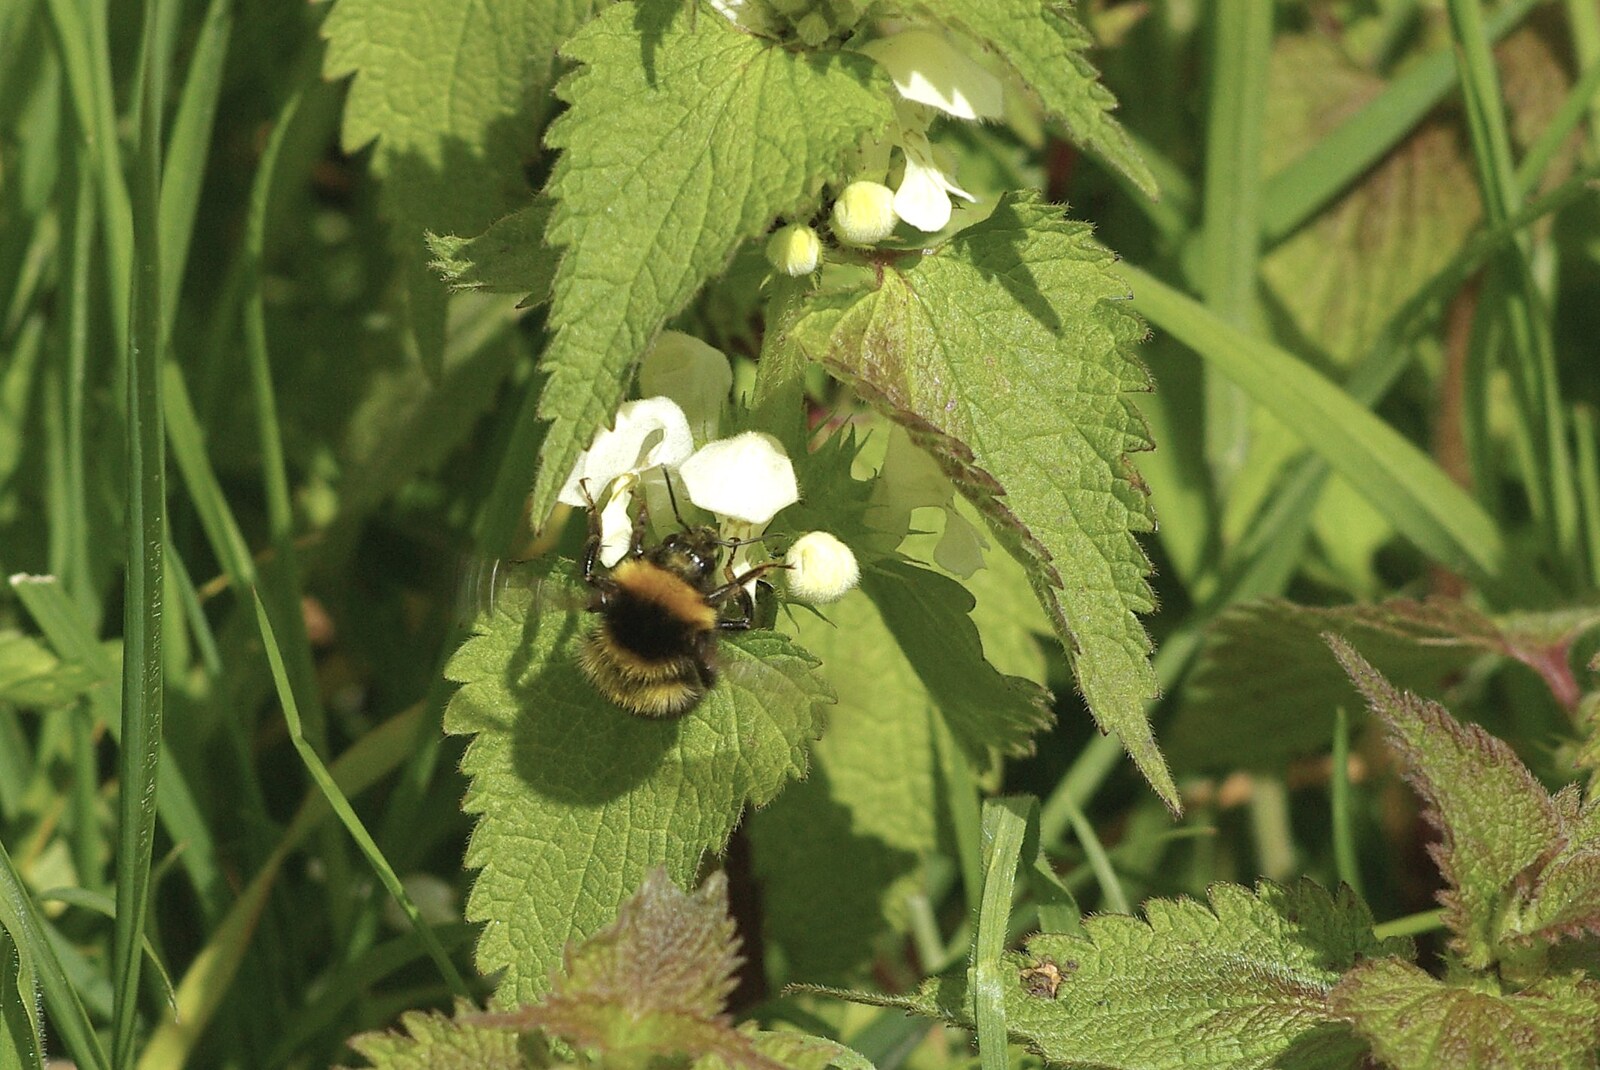 The BBs at the Carnegie Rooms, and a Mill Road Miscellany, Thetford and Cambridge - 22nd April 2008: A bumblebee on another nettle